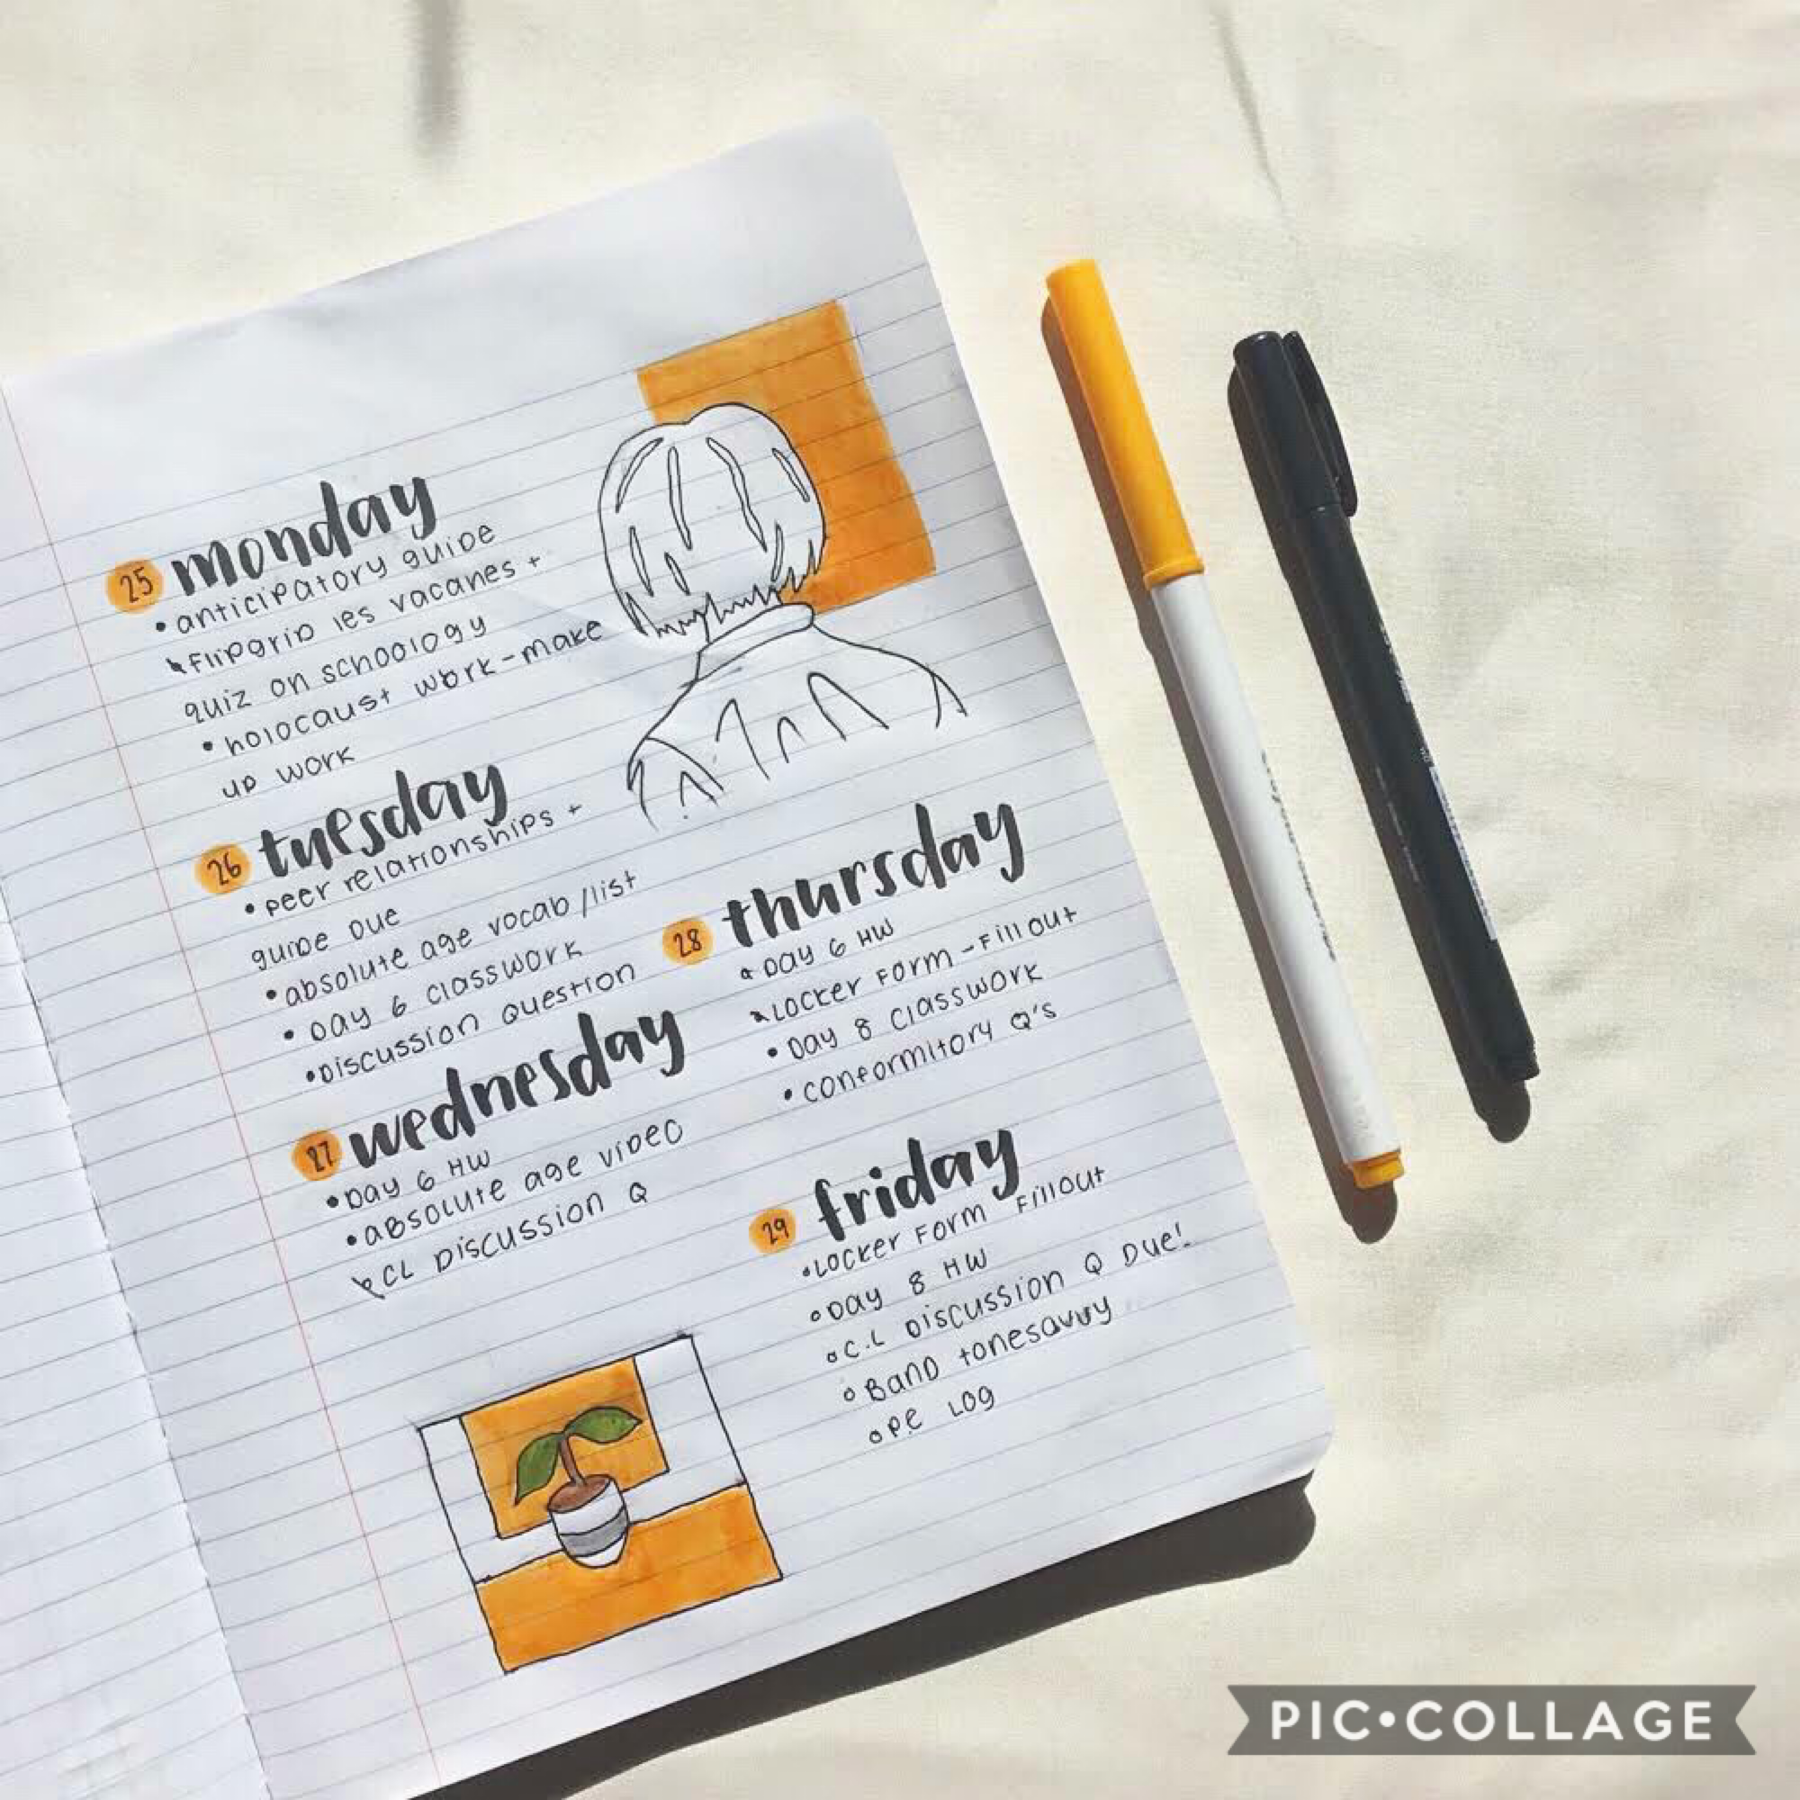 spread of the week, well last week 💫 check comments ツ 